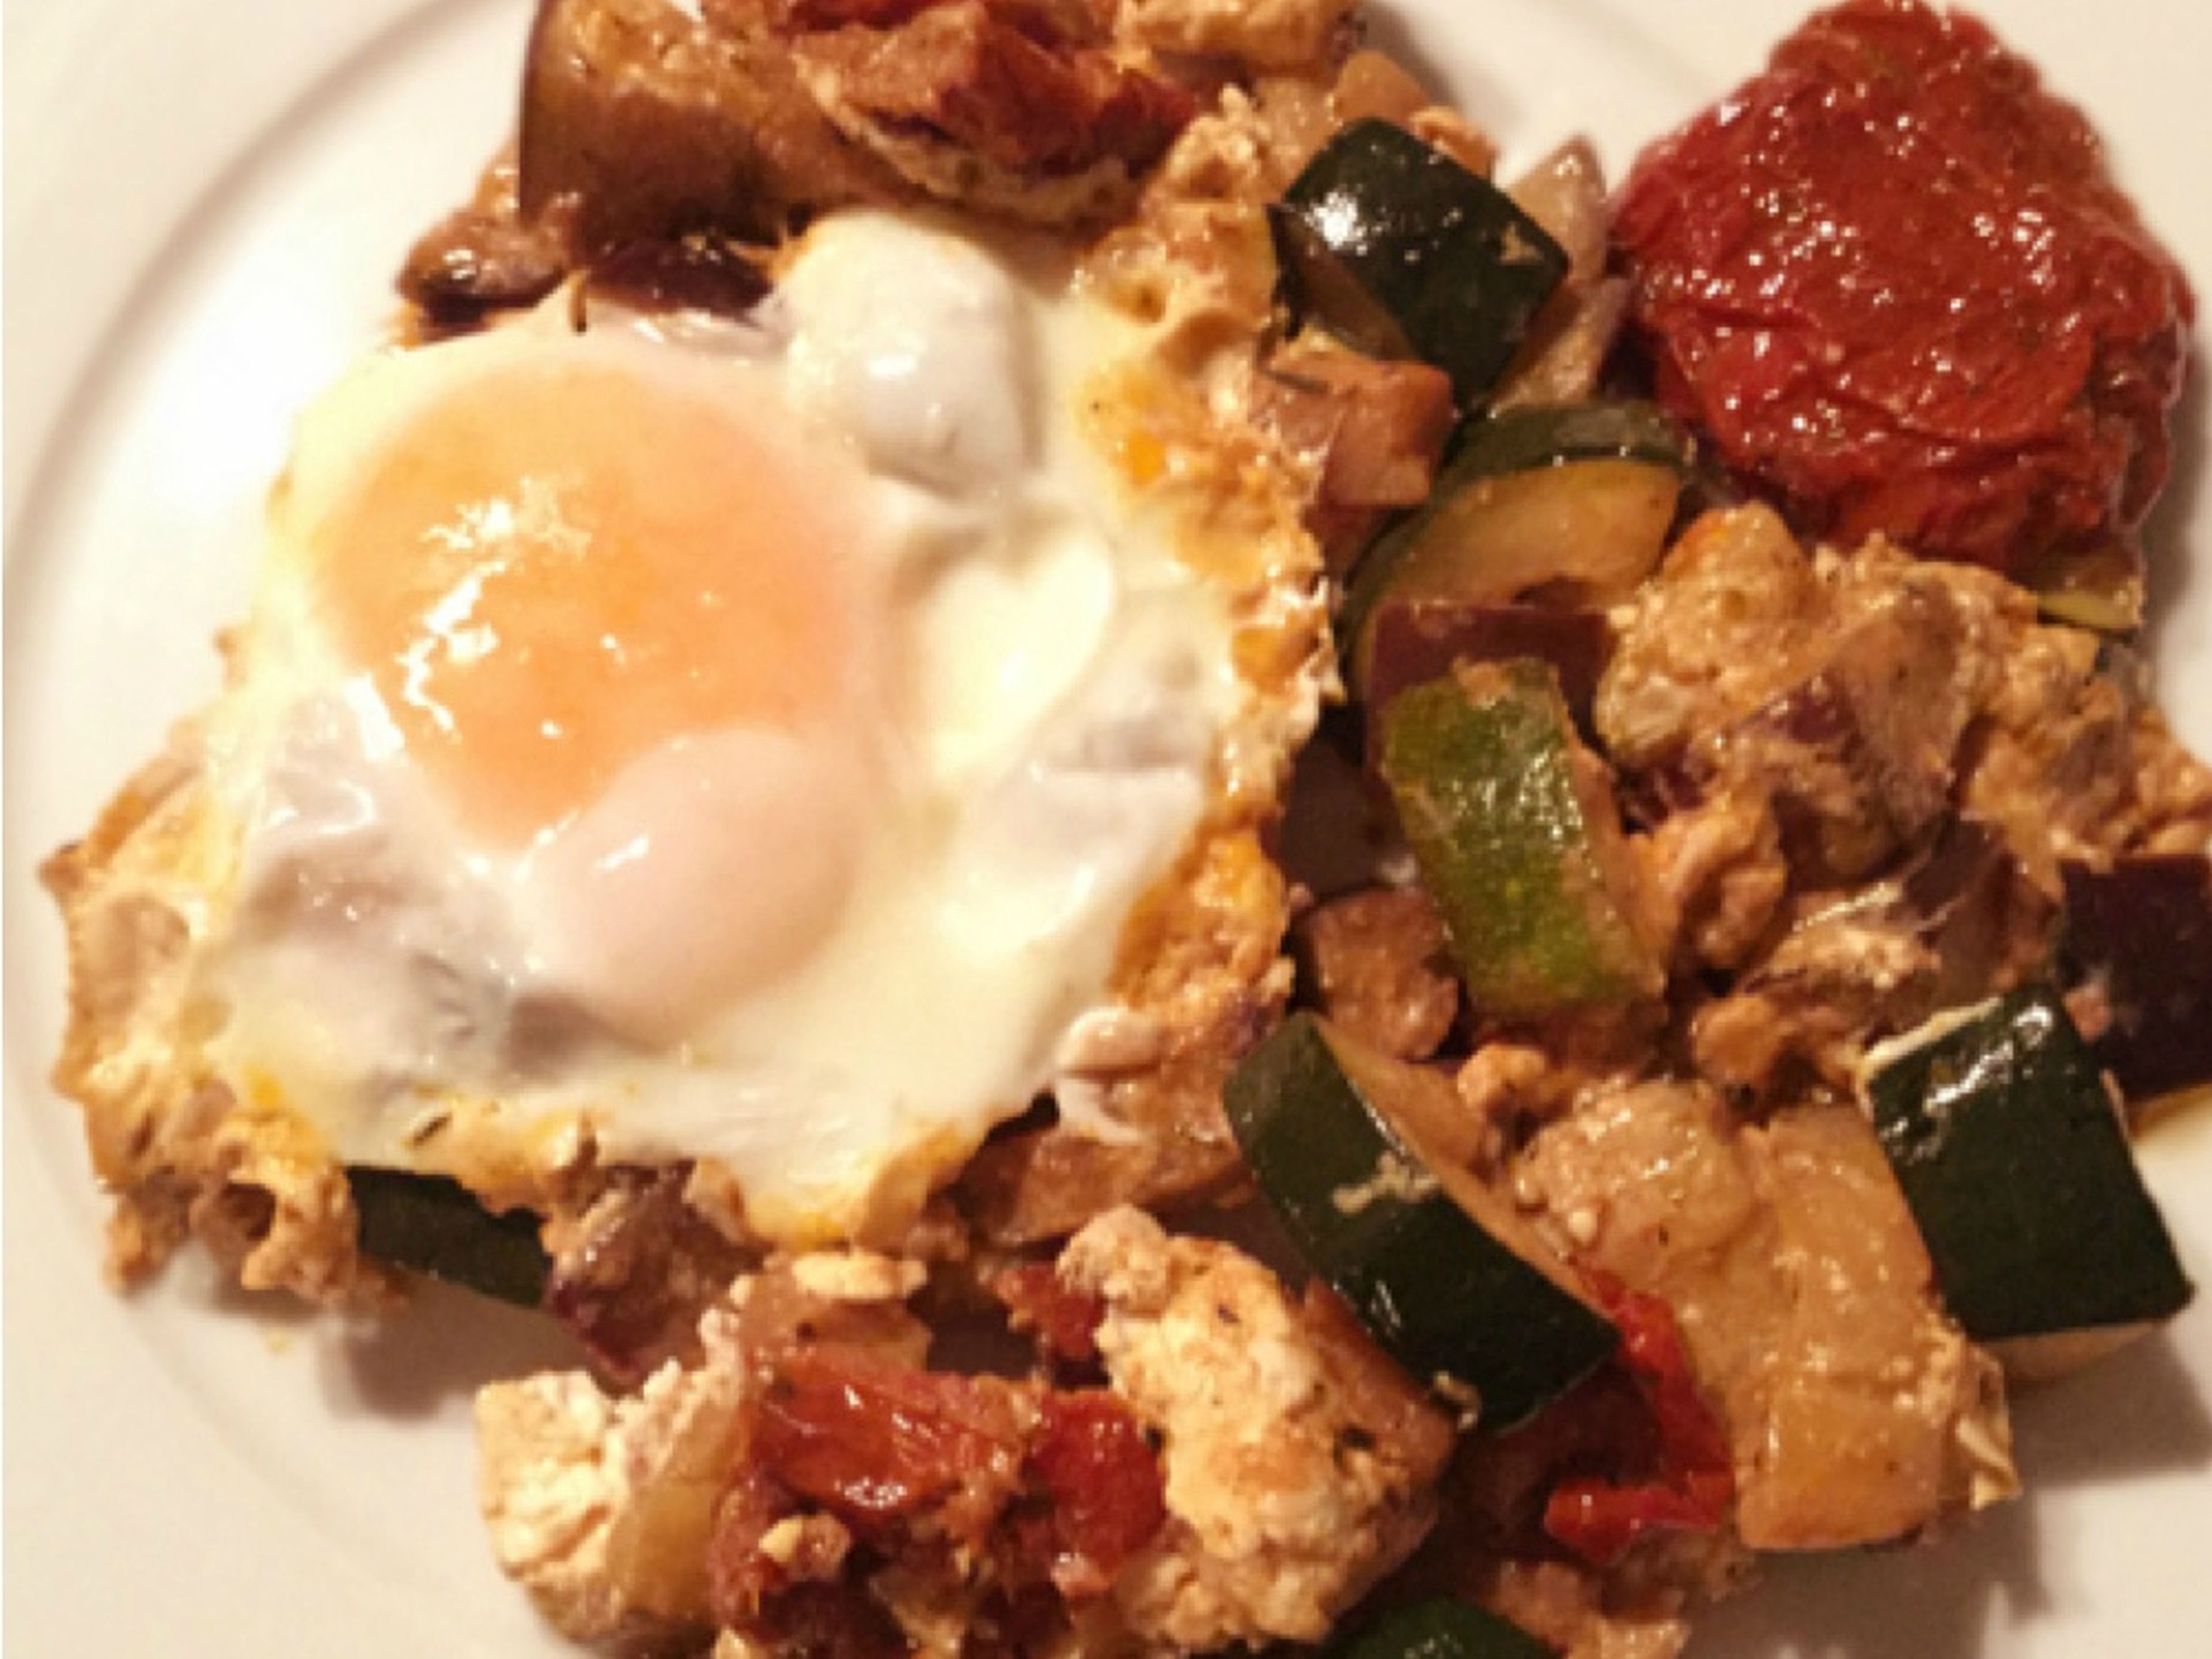 Greek-style fried vegetables with feta and egg